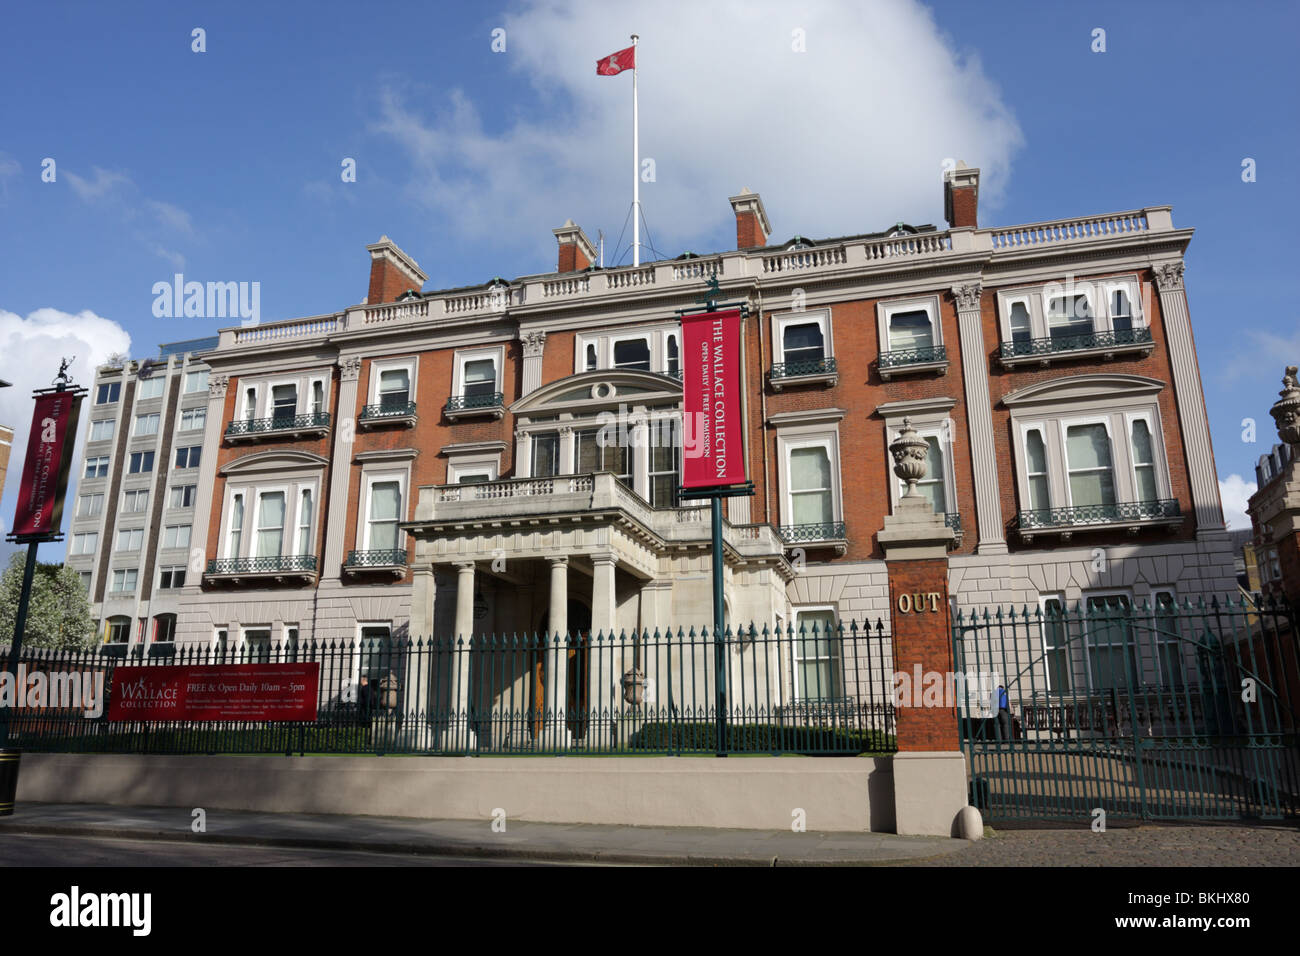 Die Wallace Collection, befindet sich in Manchester Square in London. Stockfoto